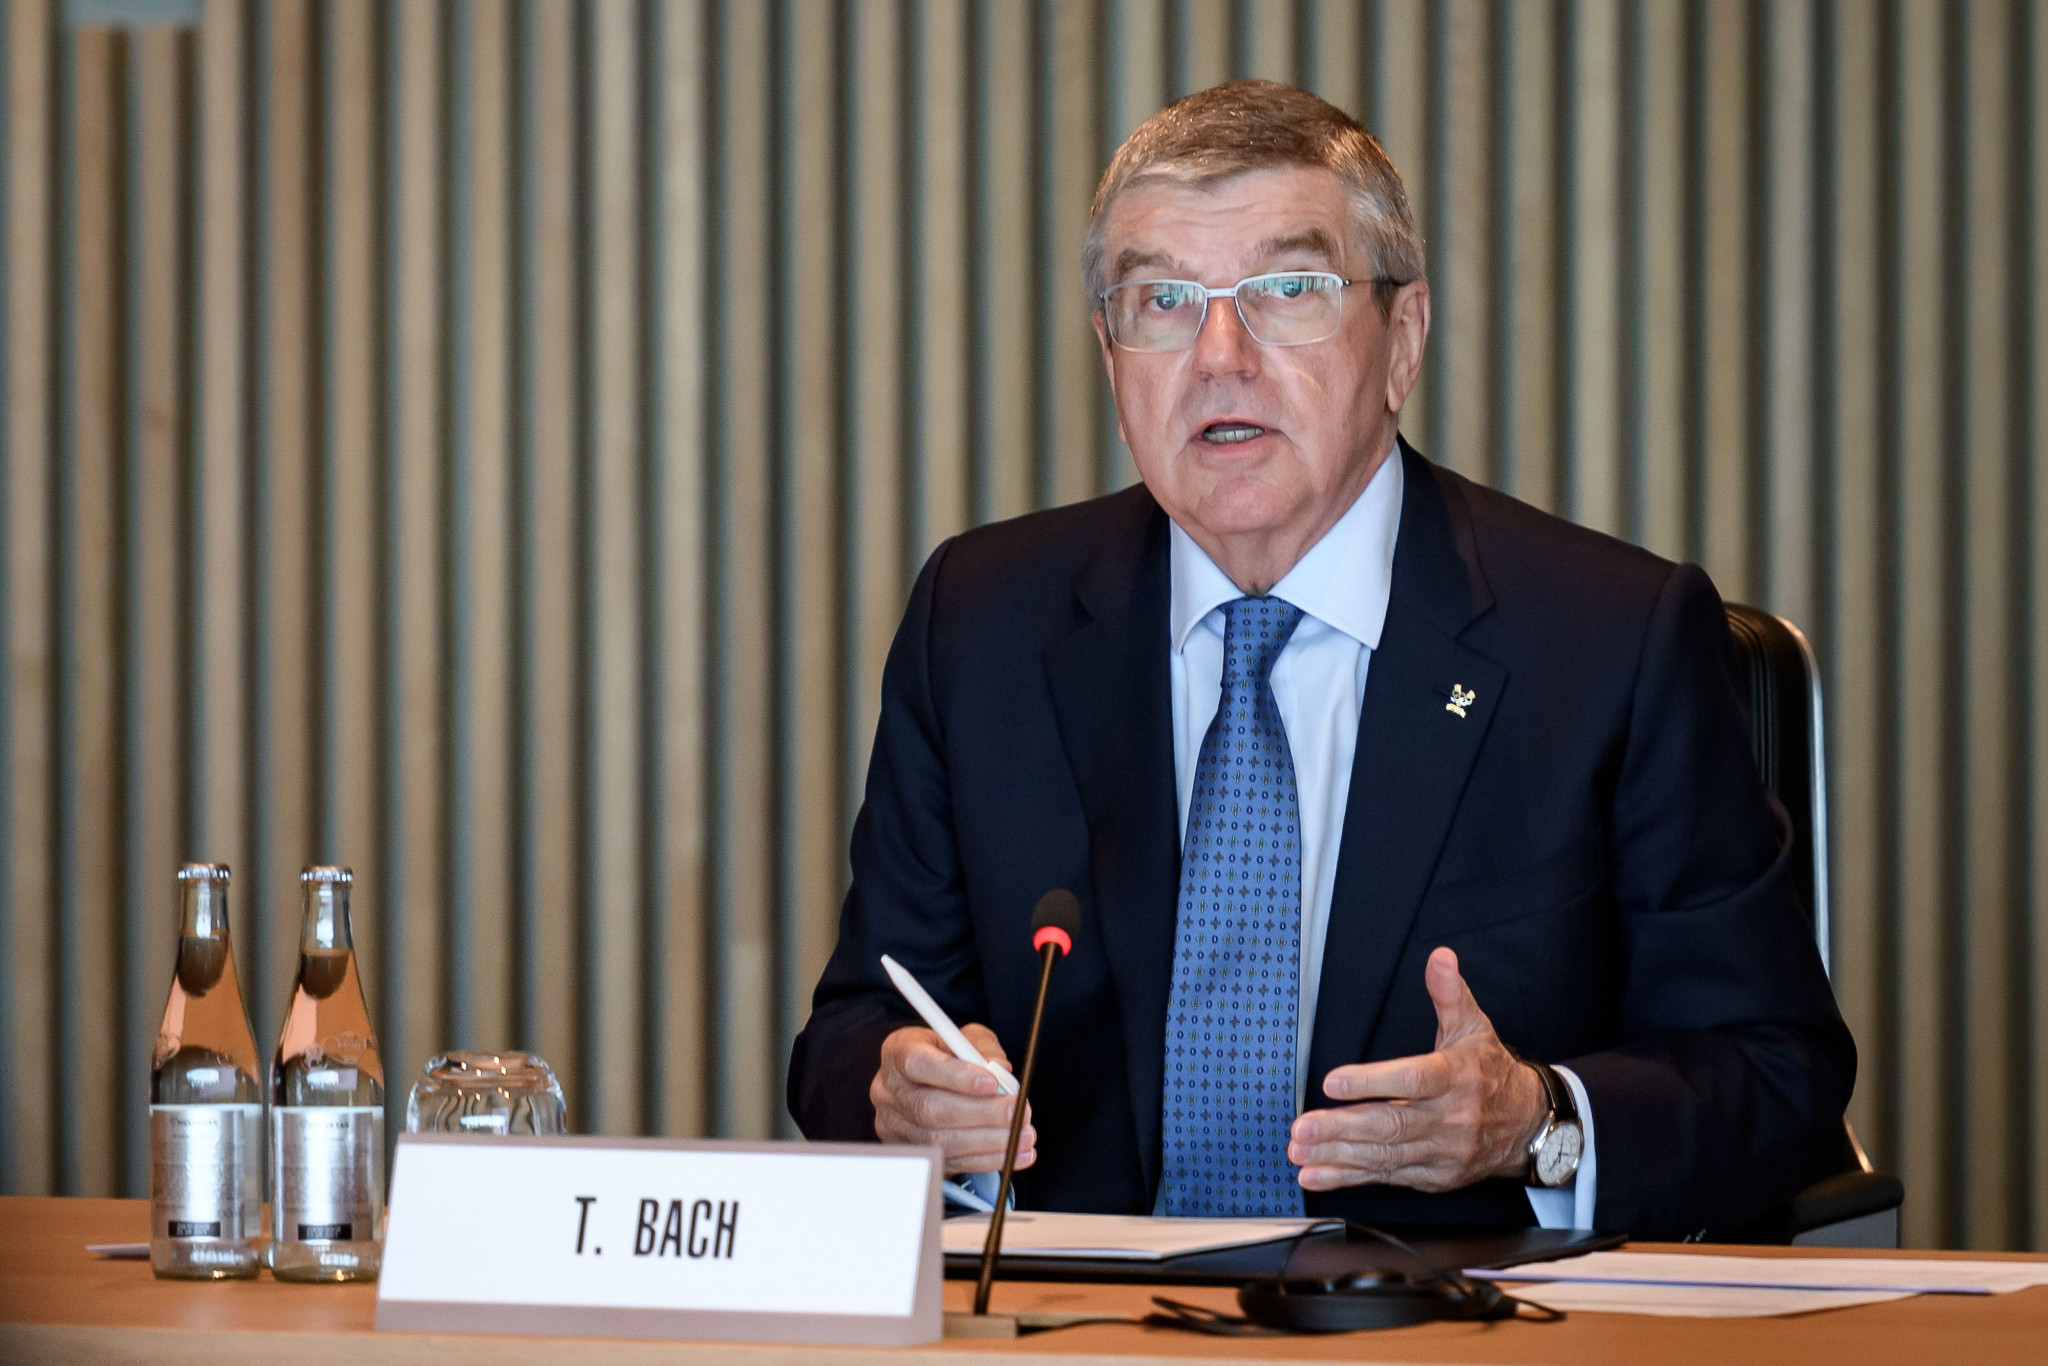 An upbeat IOC President has insisted the organisation is confident the Games will be a success ©Getty Images